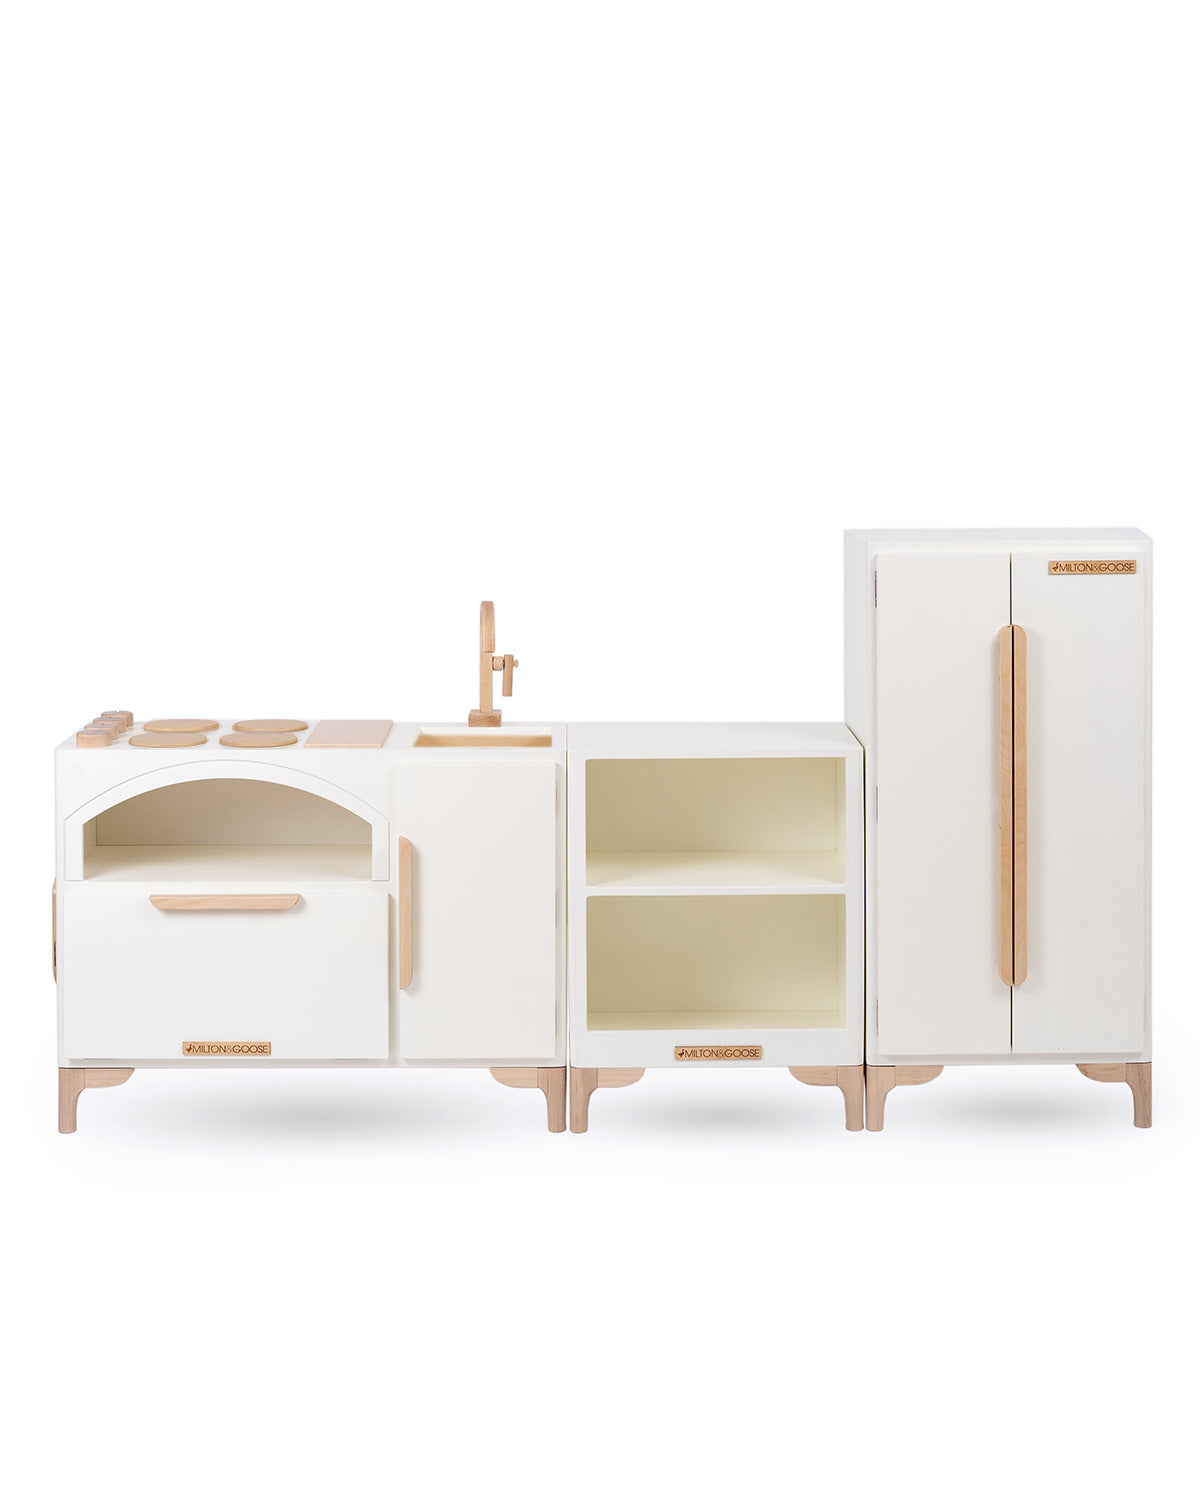 Milton & Goose Luca Play Kitchen collection in white. Collection includes the Play Kitchen with pizza paddle, Countertop, and play refrigerator.